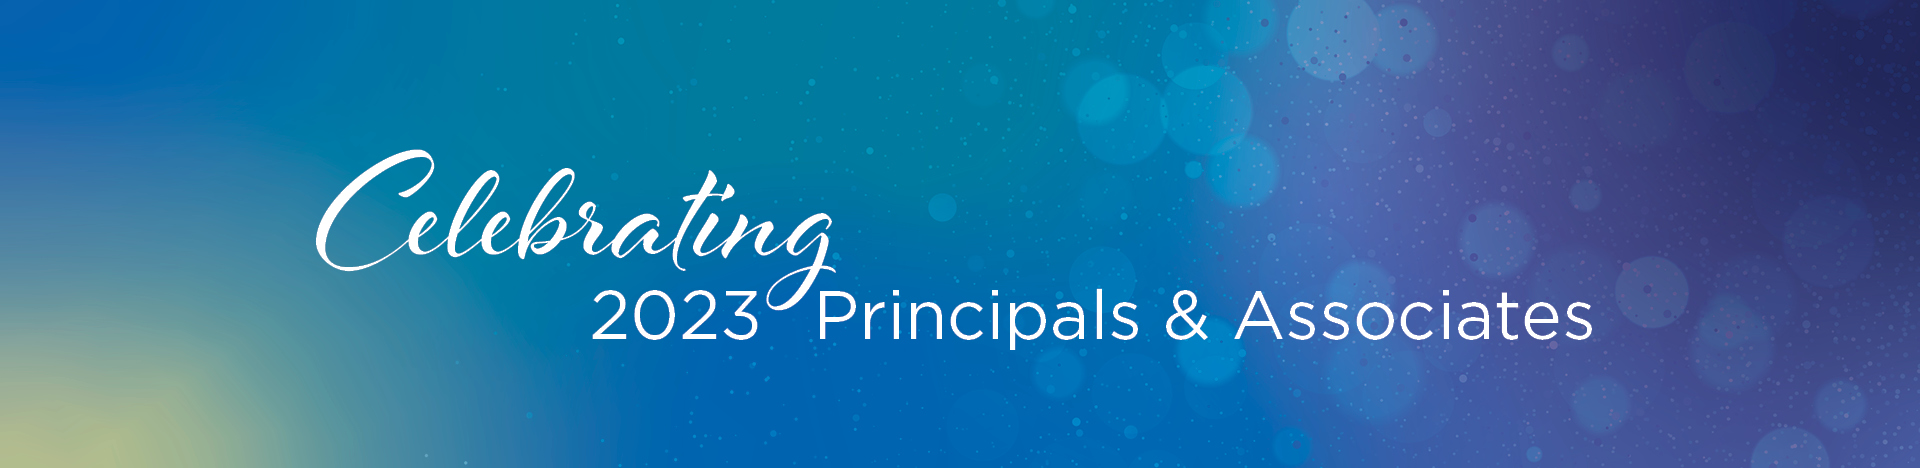 Banner with text celebrating 2023 principals and associates.